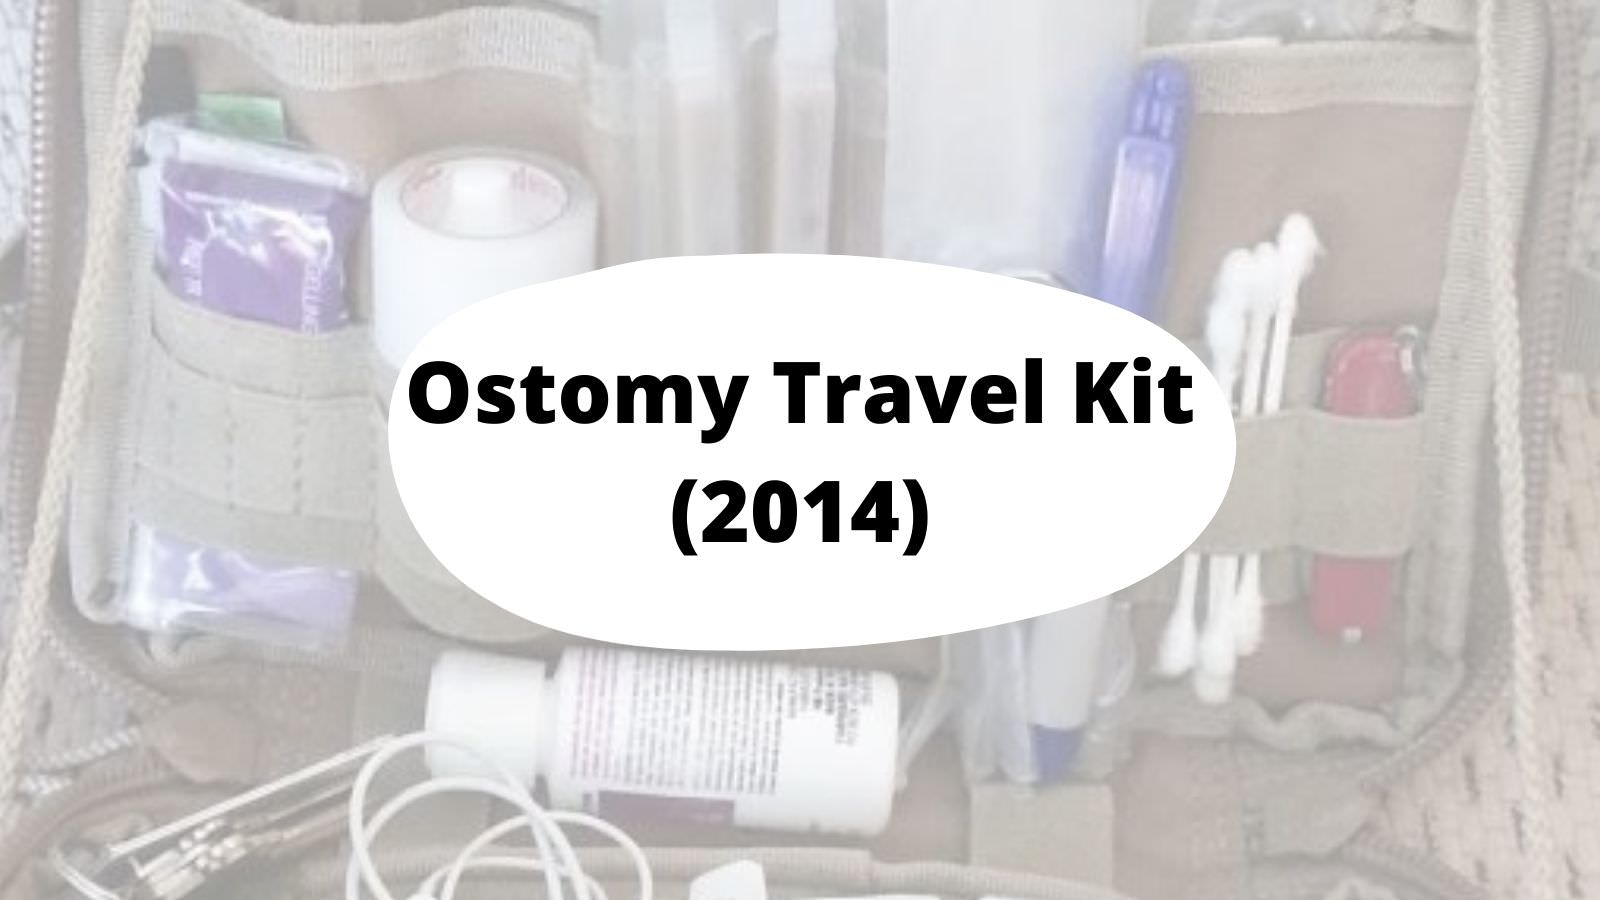 Coloplast Travel Bag for Ostomy Supplies Hook for Hanging Zippered